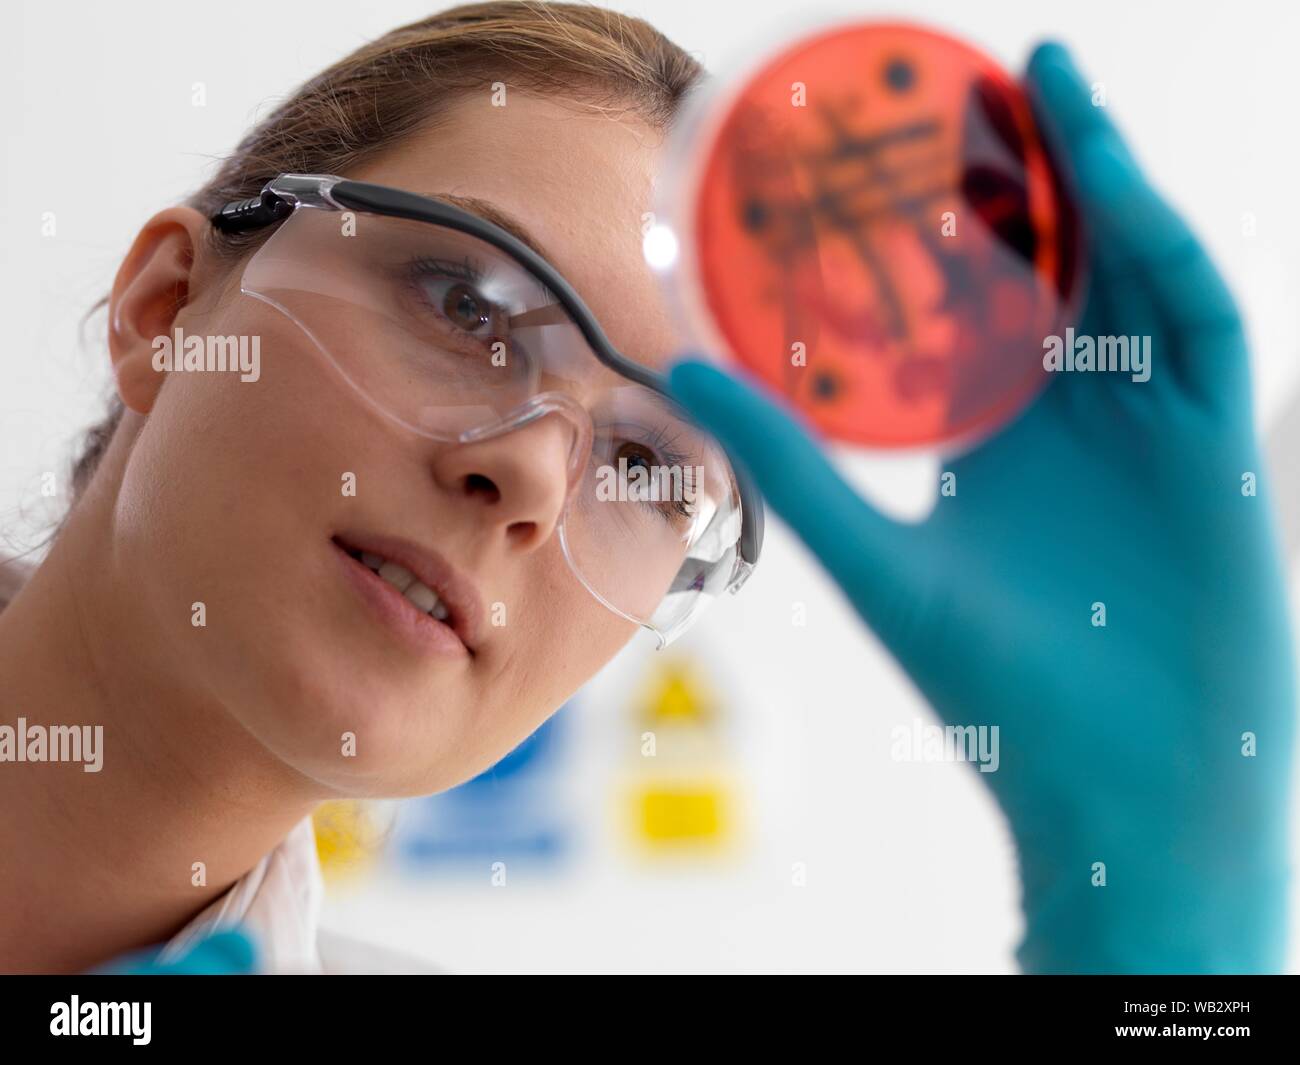 Microbiology research. Scientist viewing cultures growing in petri dishes. Stock Photo